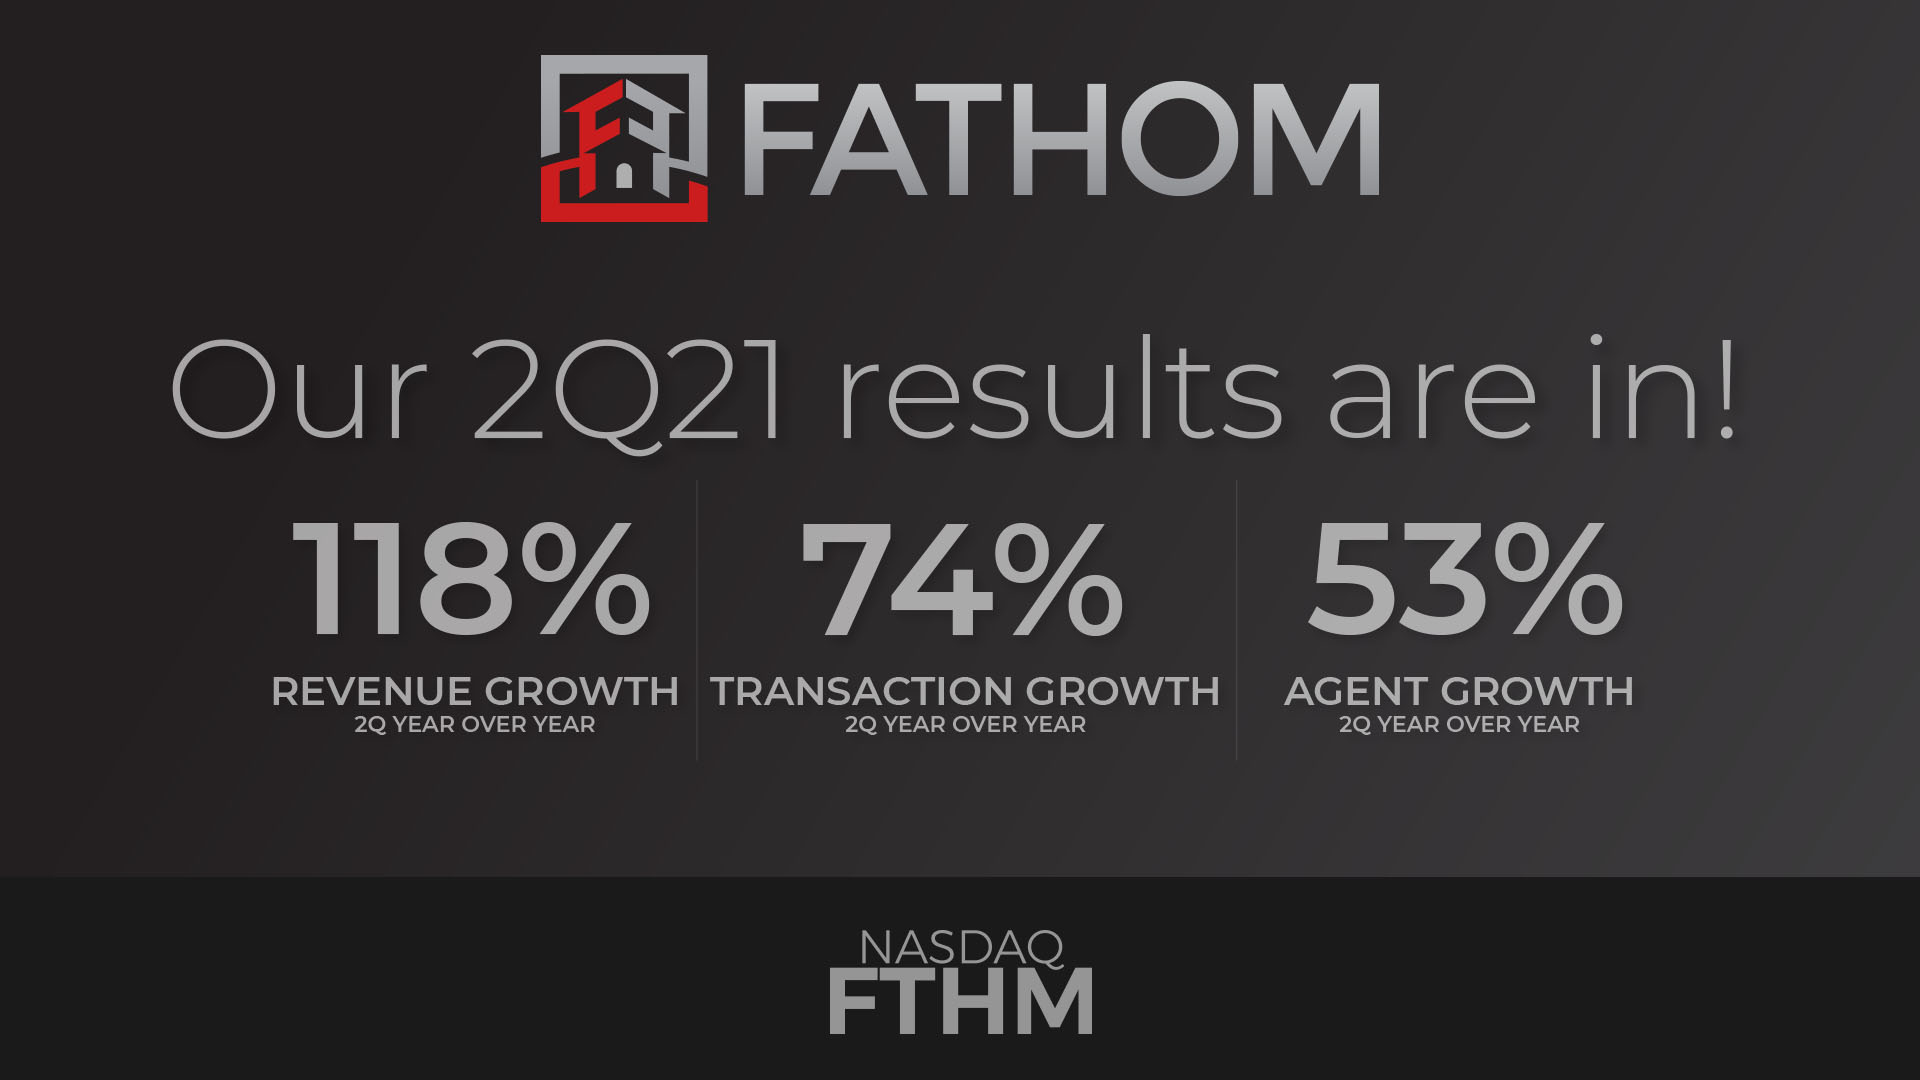 Featured image for “Fathom Holdings Inc. Second Quarter 2021 Earnings Report”